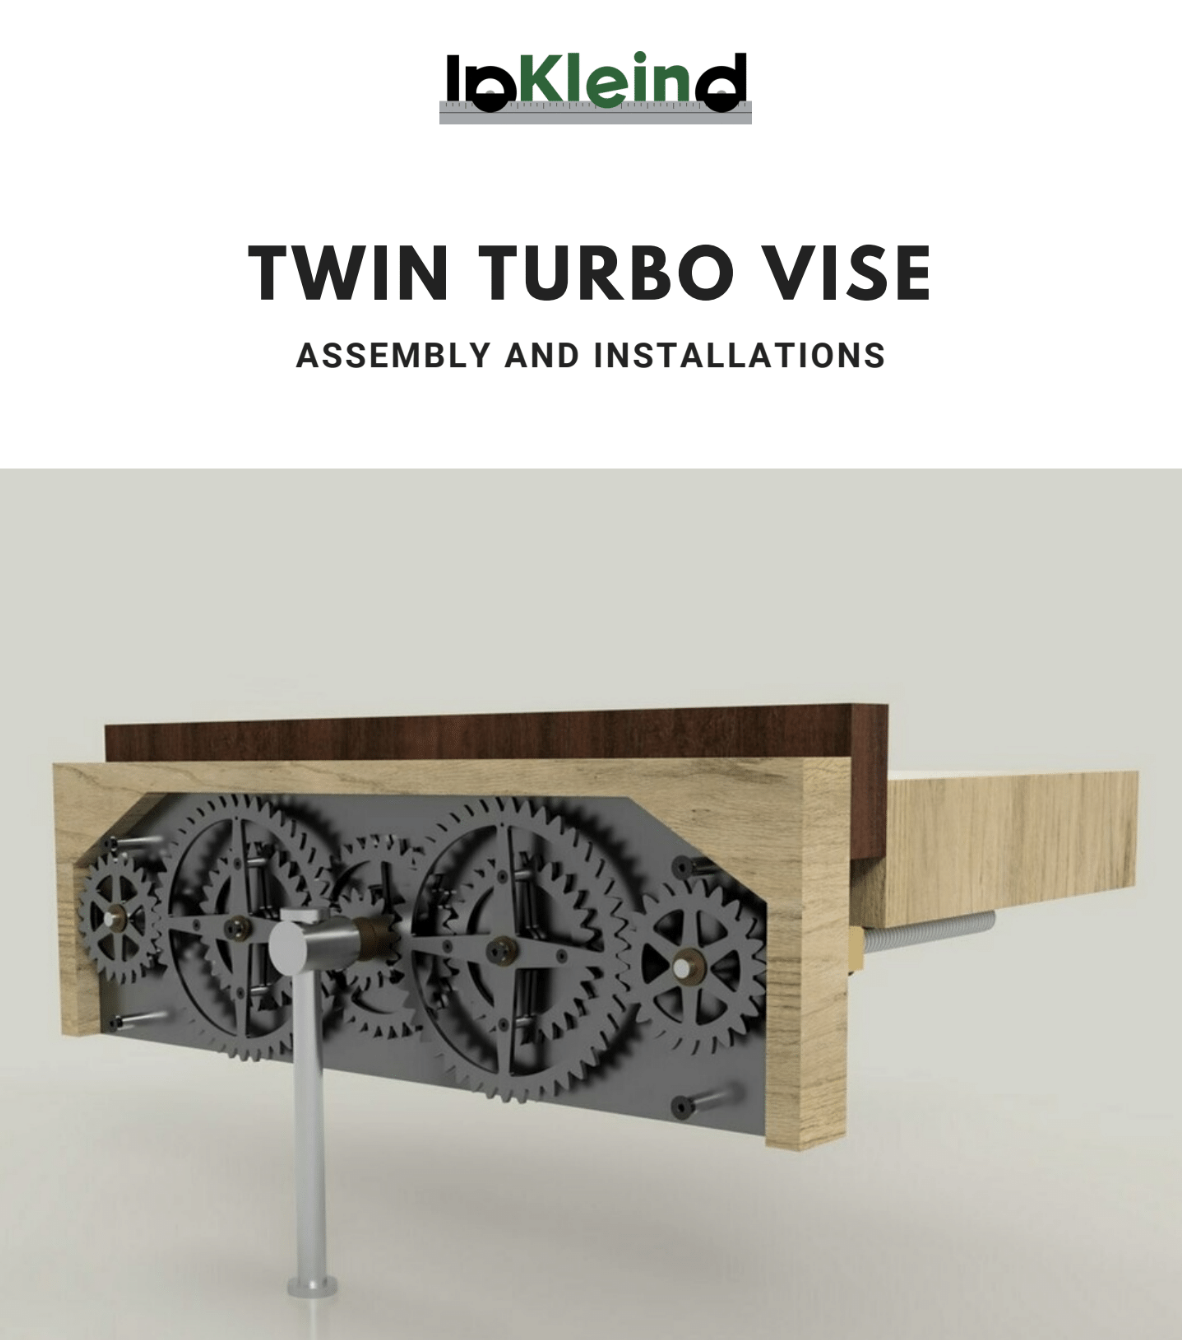 Twin Turbo Vise Instructions